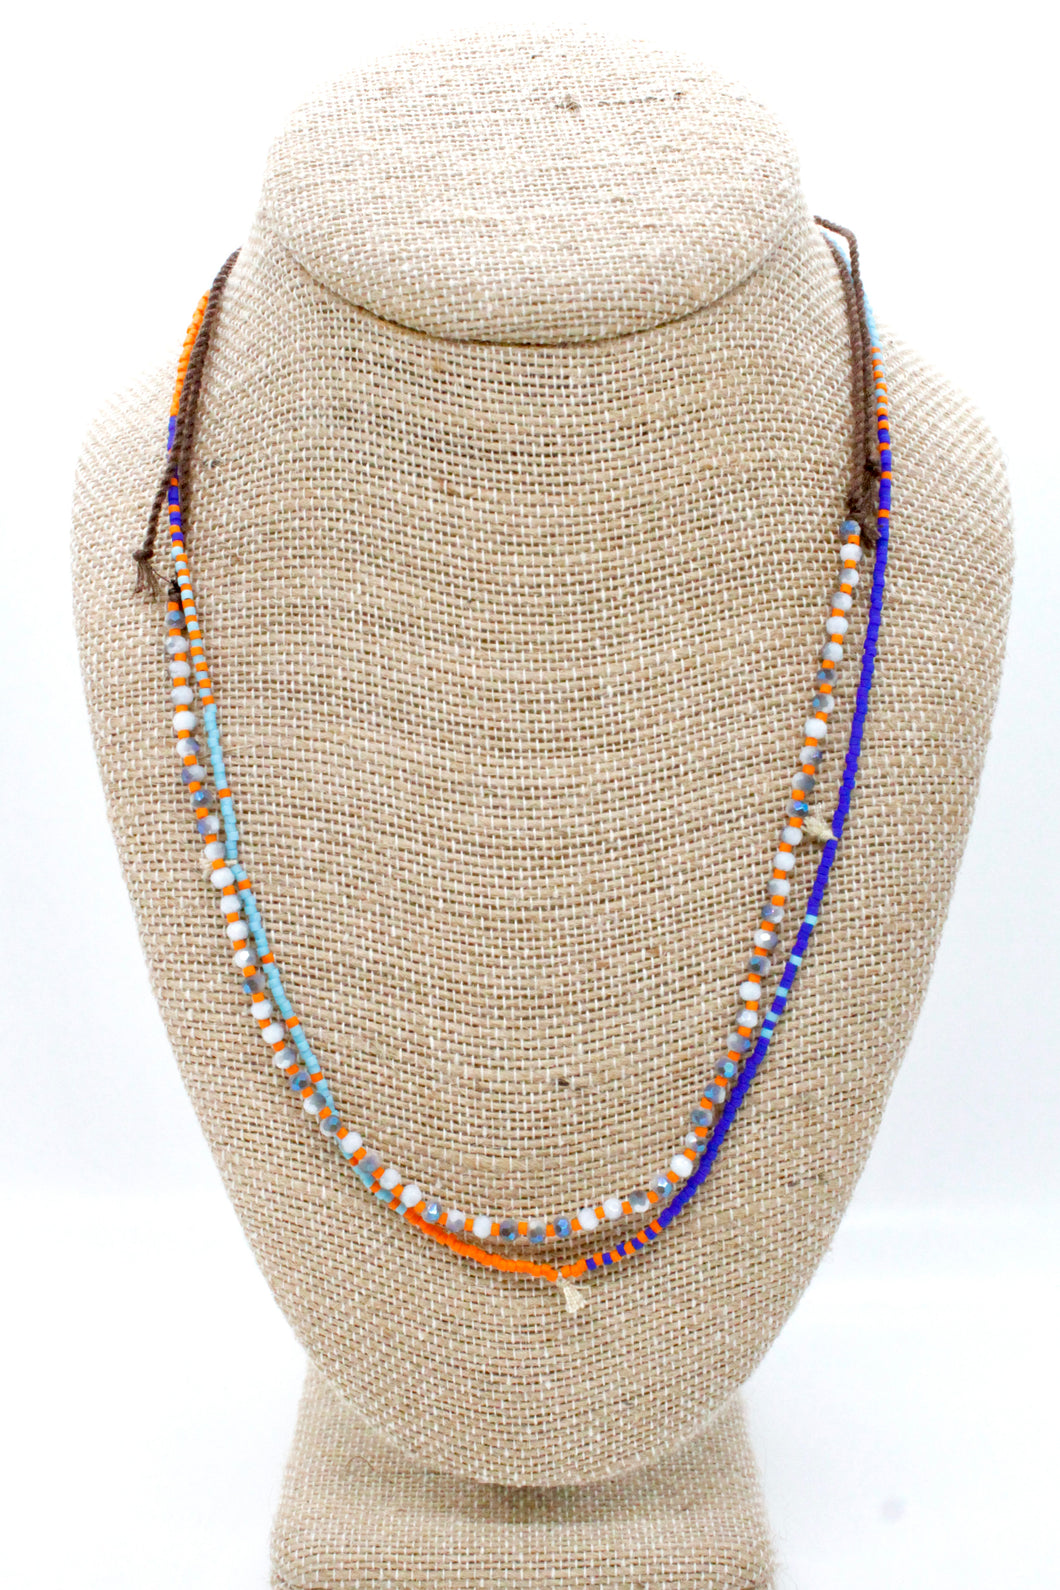 Double Strand Colorful Thread and Seed Bead Necklace - Seeds Collection- N8-006